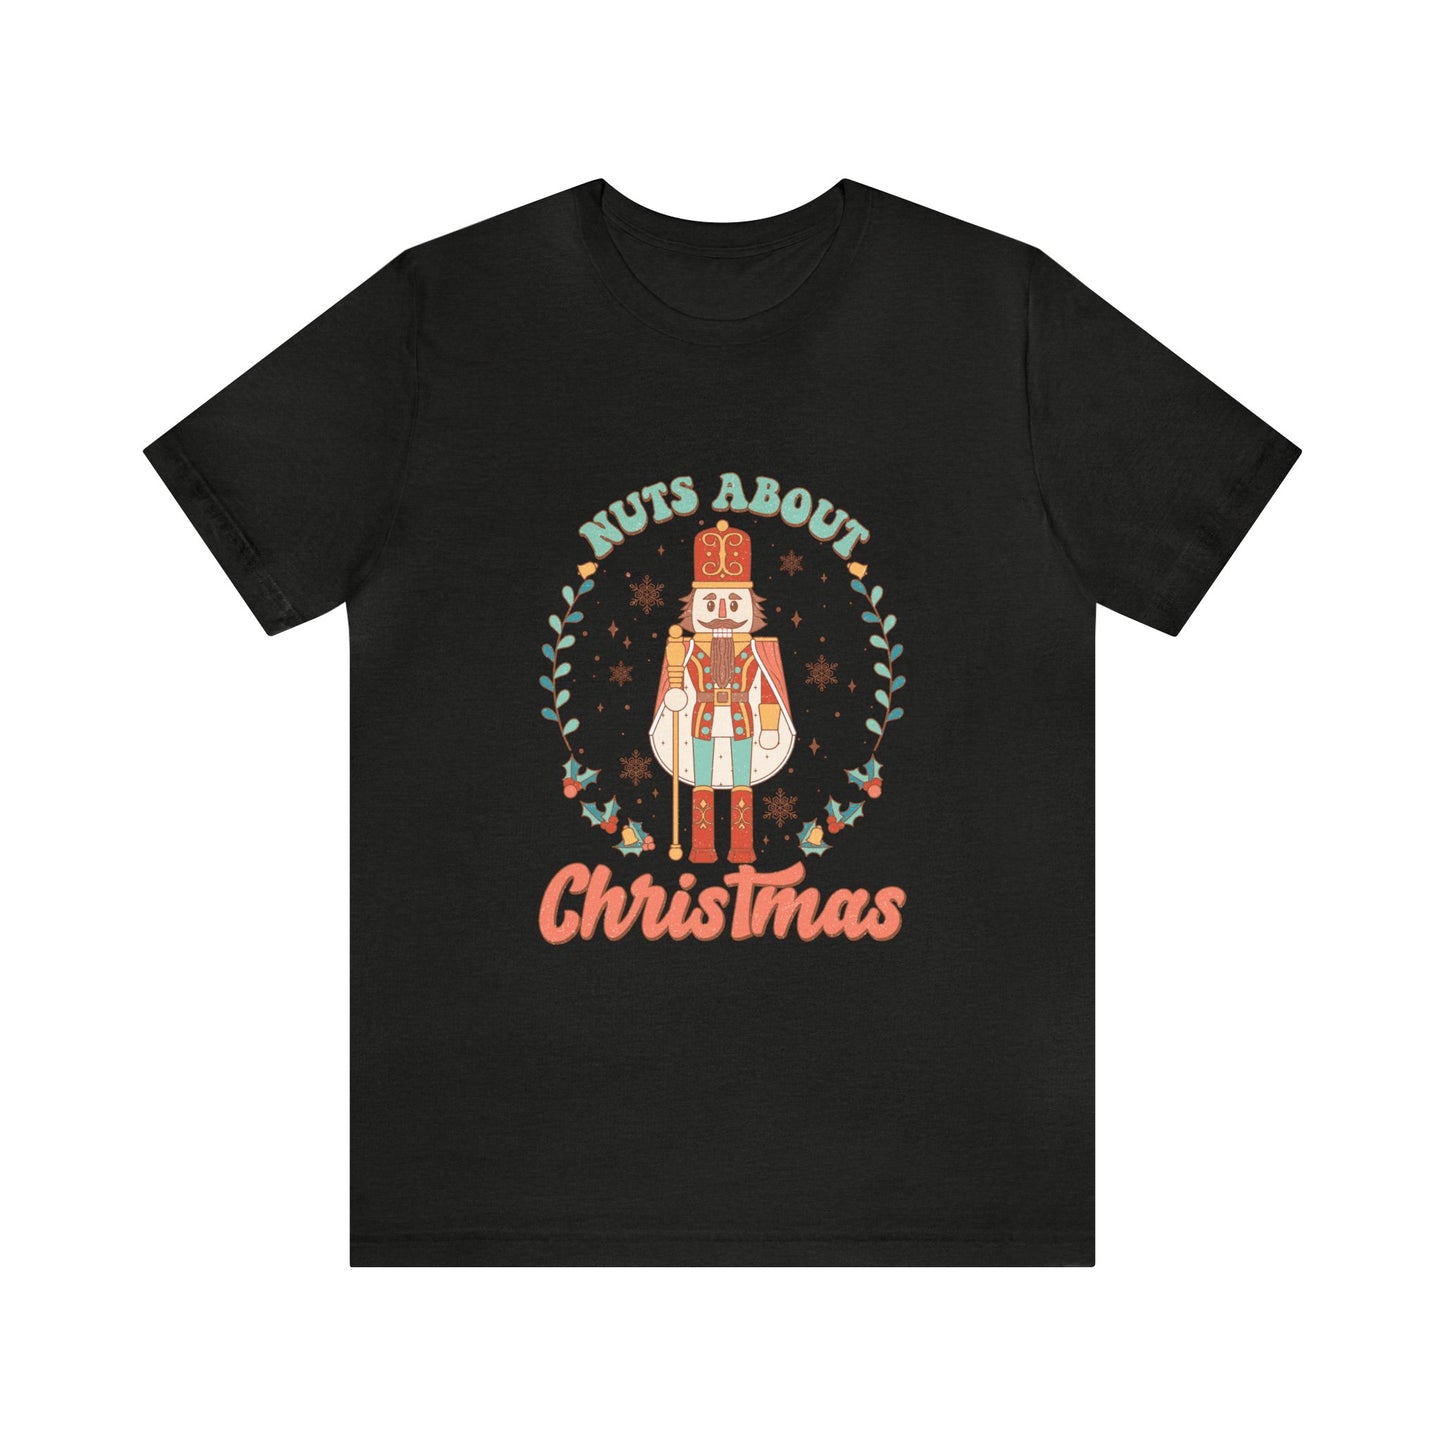 Nuts About Christmas Women's Short Sleeve Christmas T Shirt